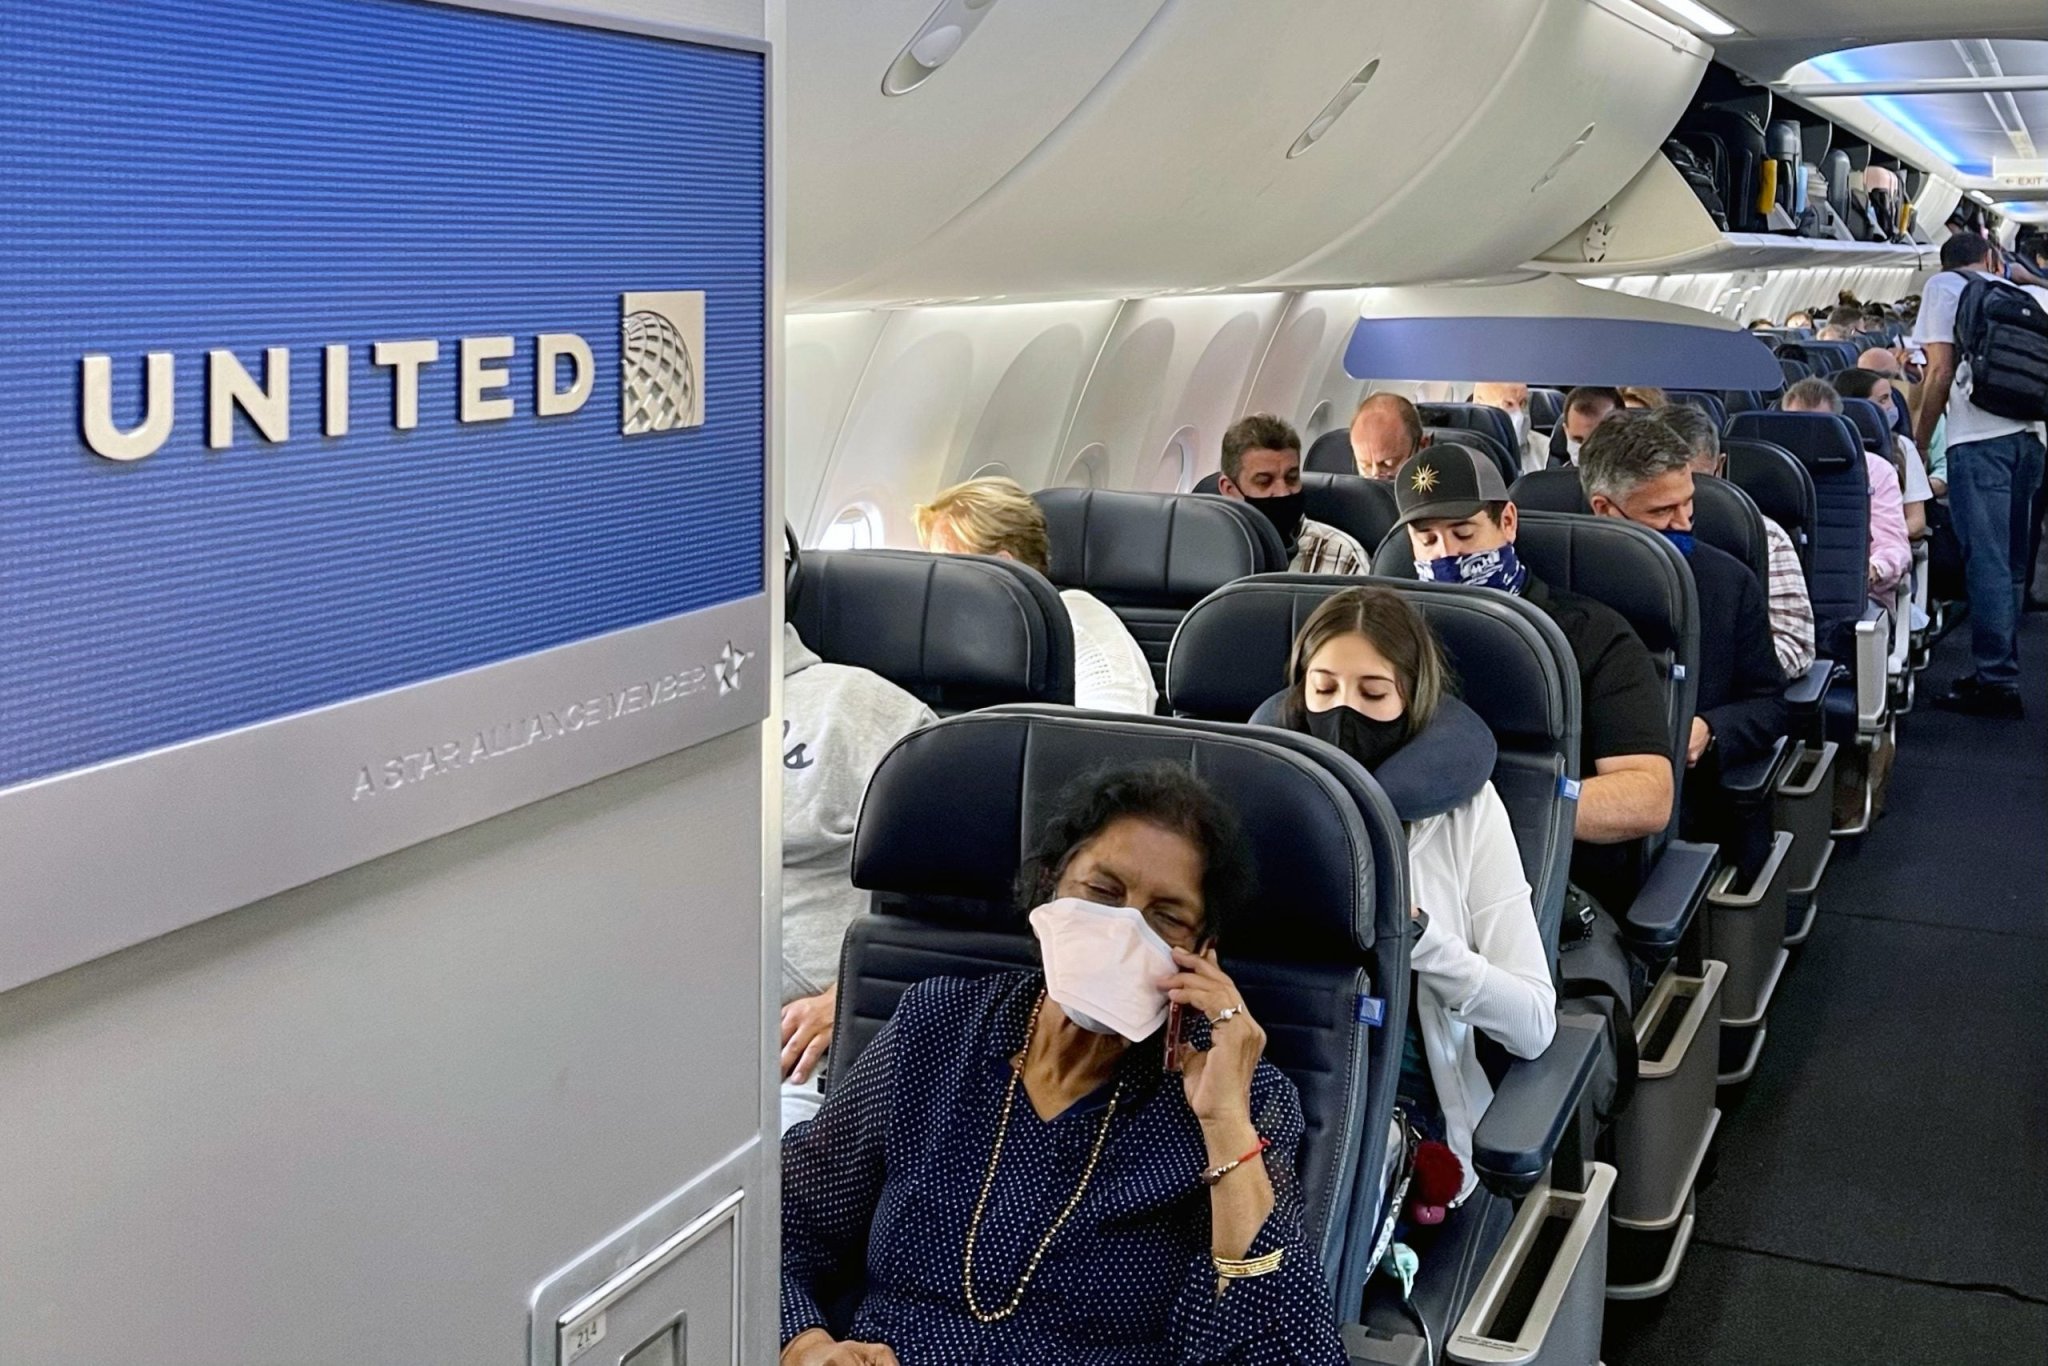 United discontinues practice of allowing free changes for 'fuller' flights